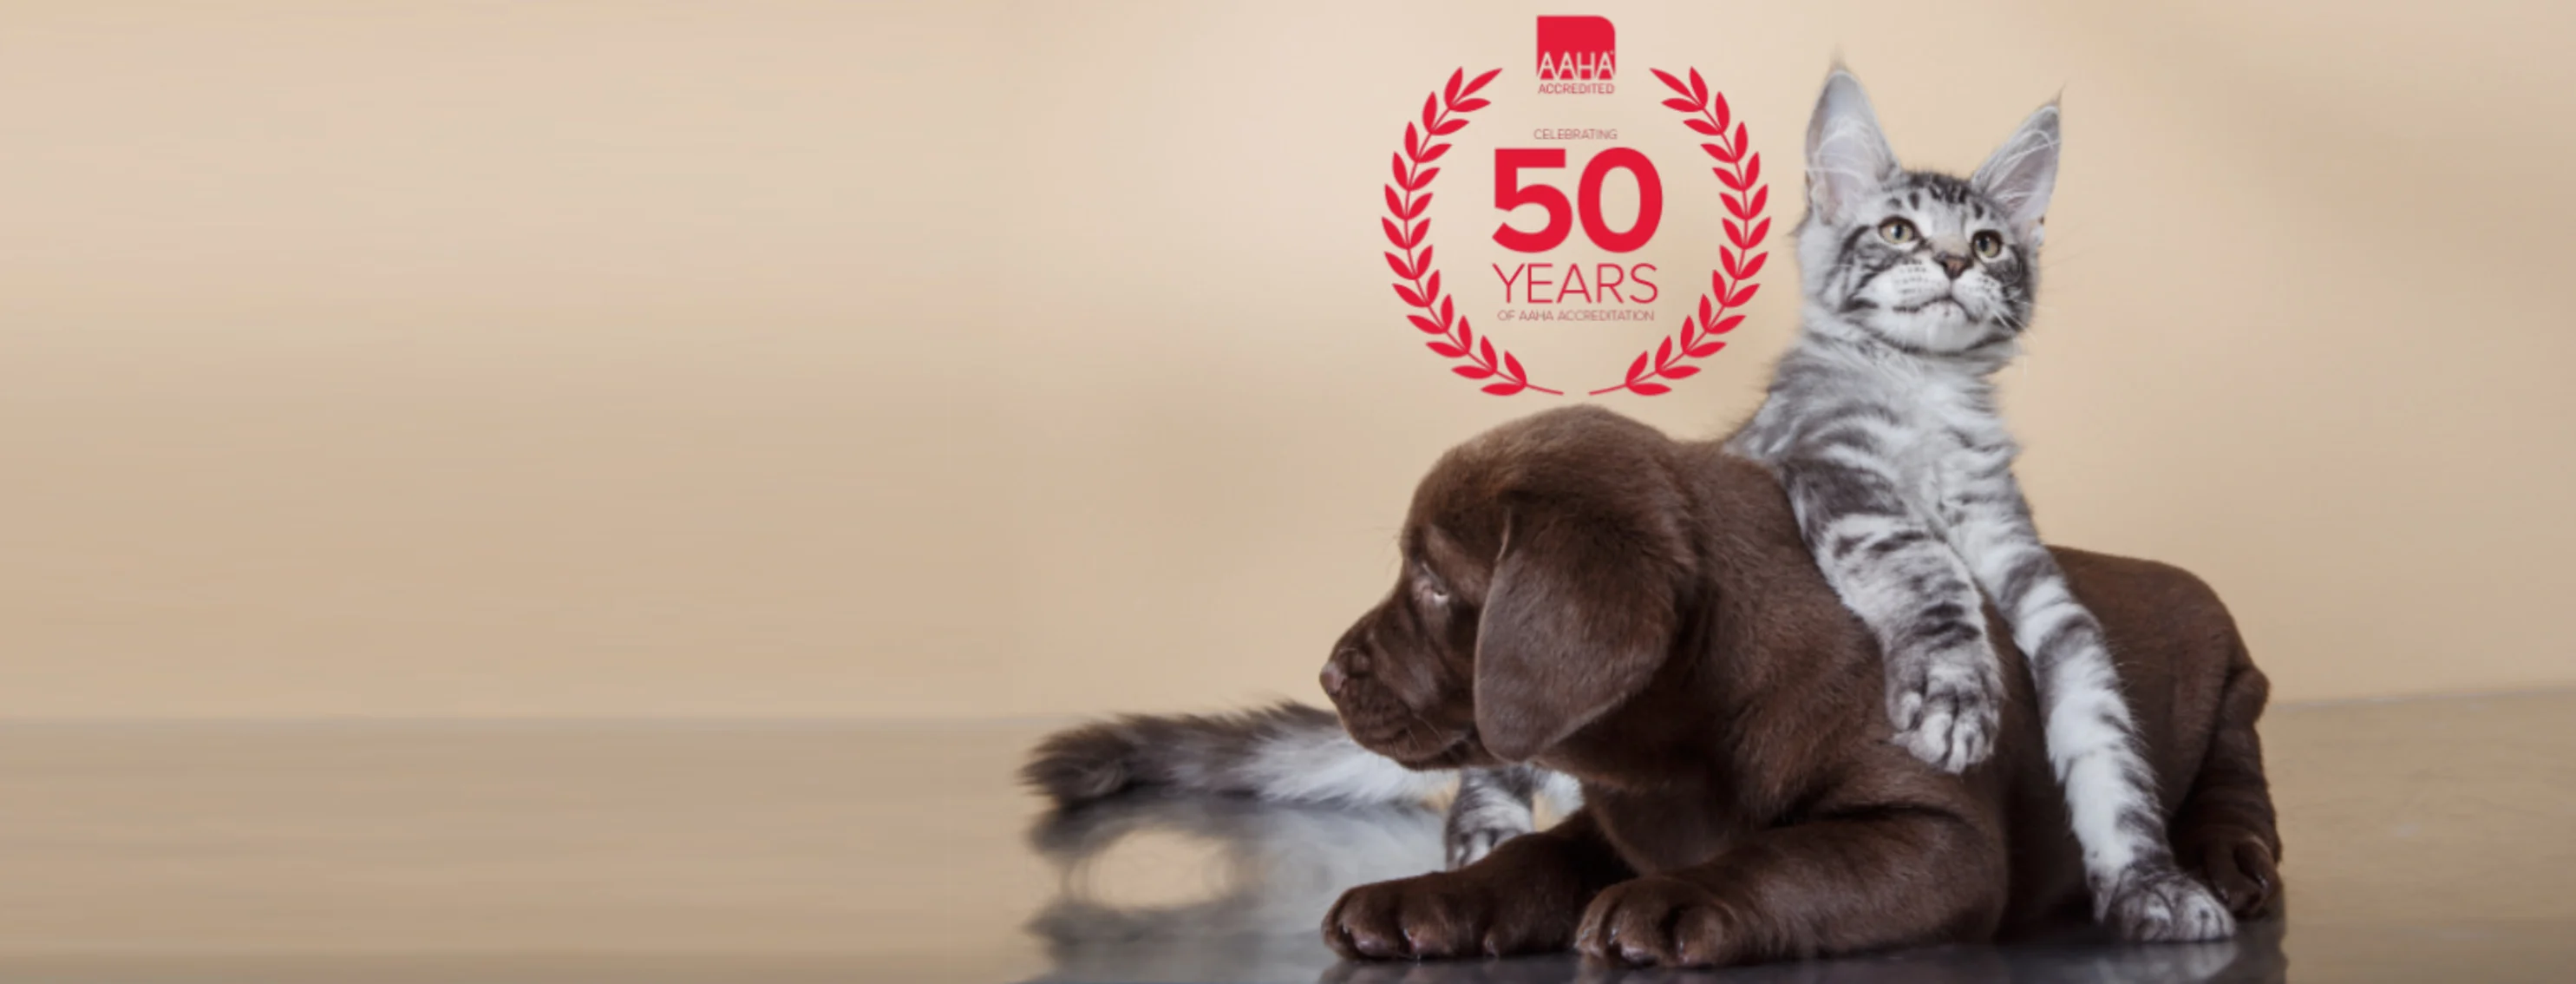 Gray Cat Sitting on Dark Brown Puppy with AAHA 50 Years Logo